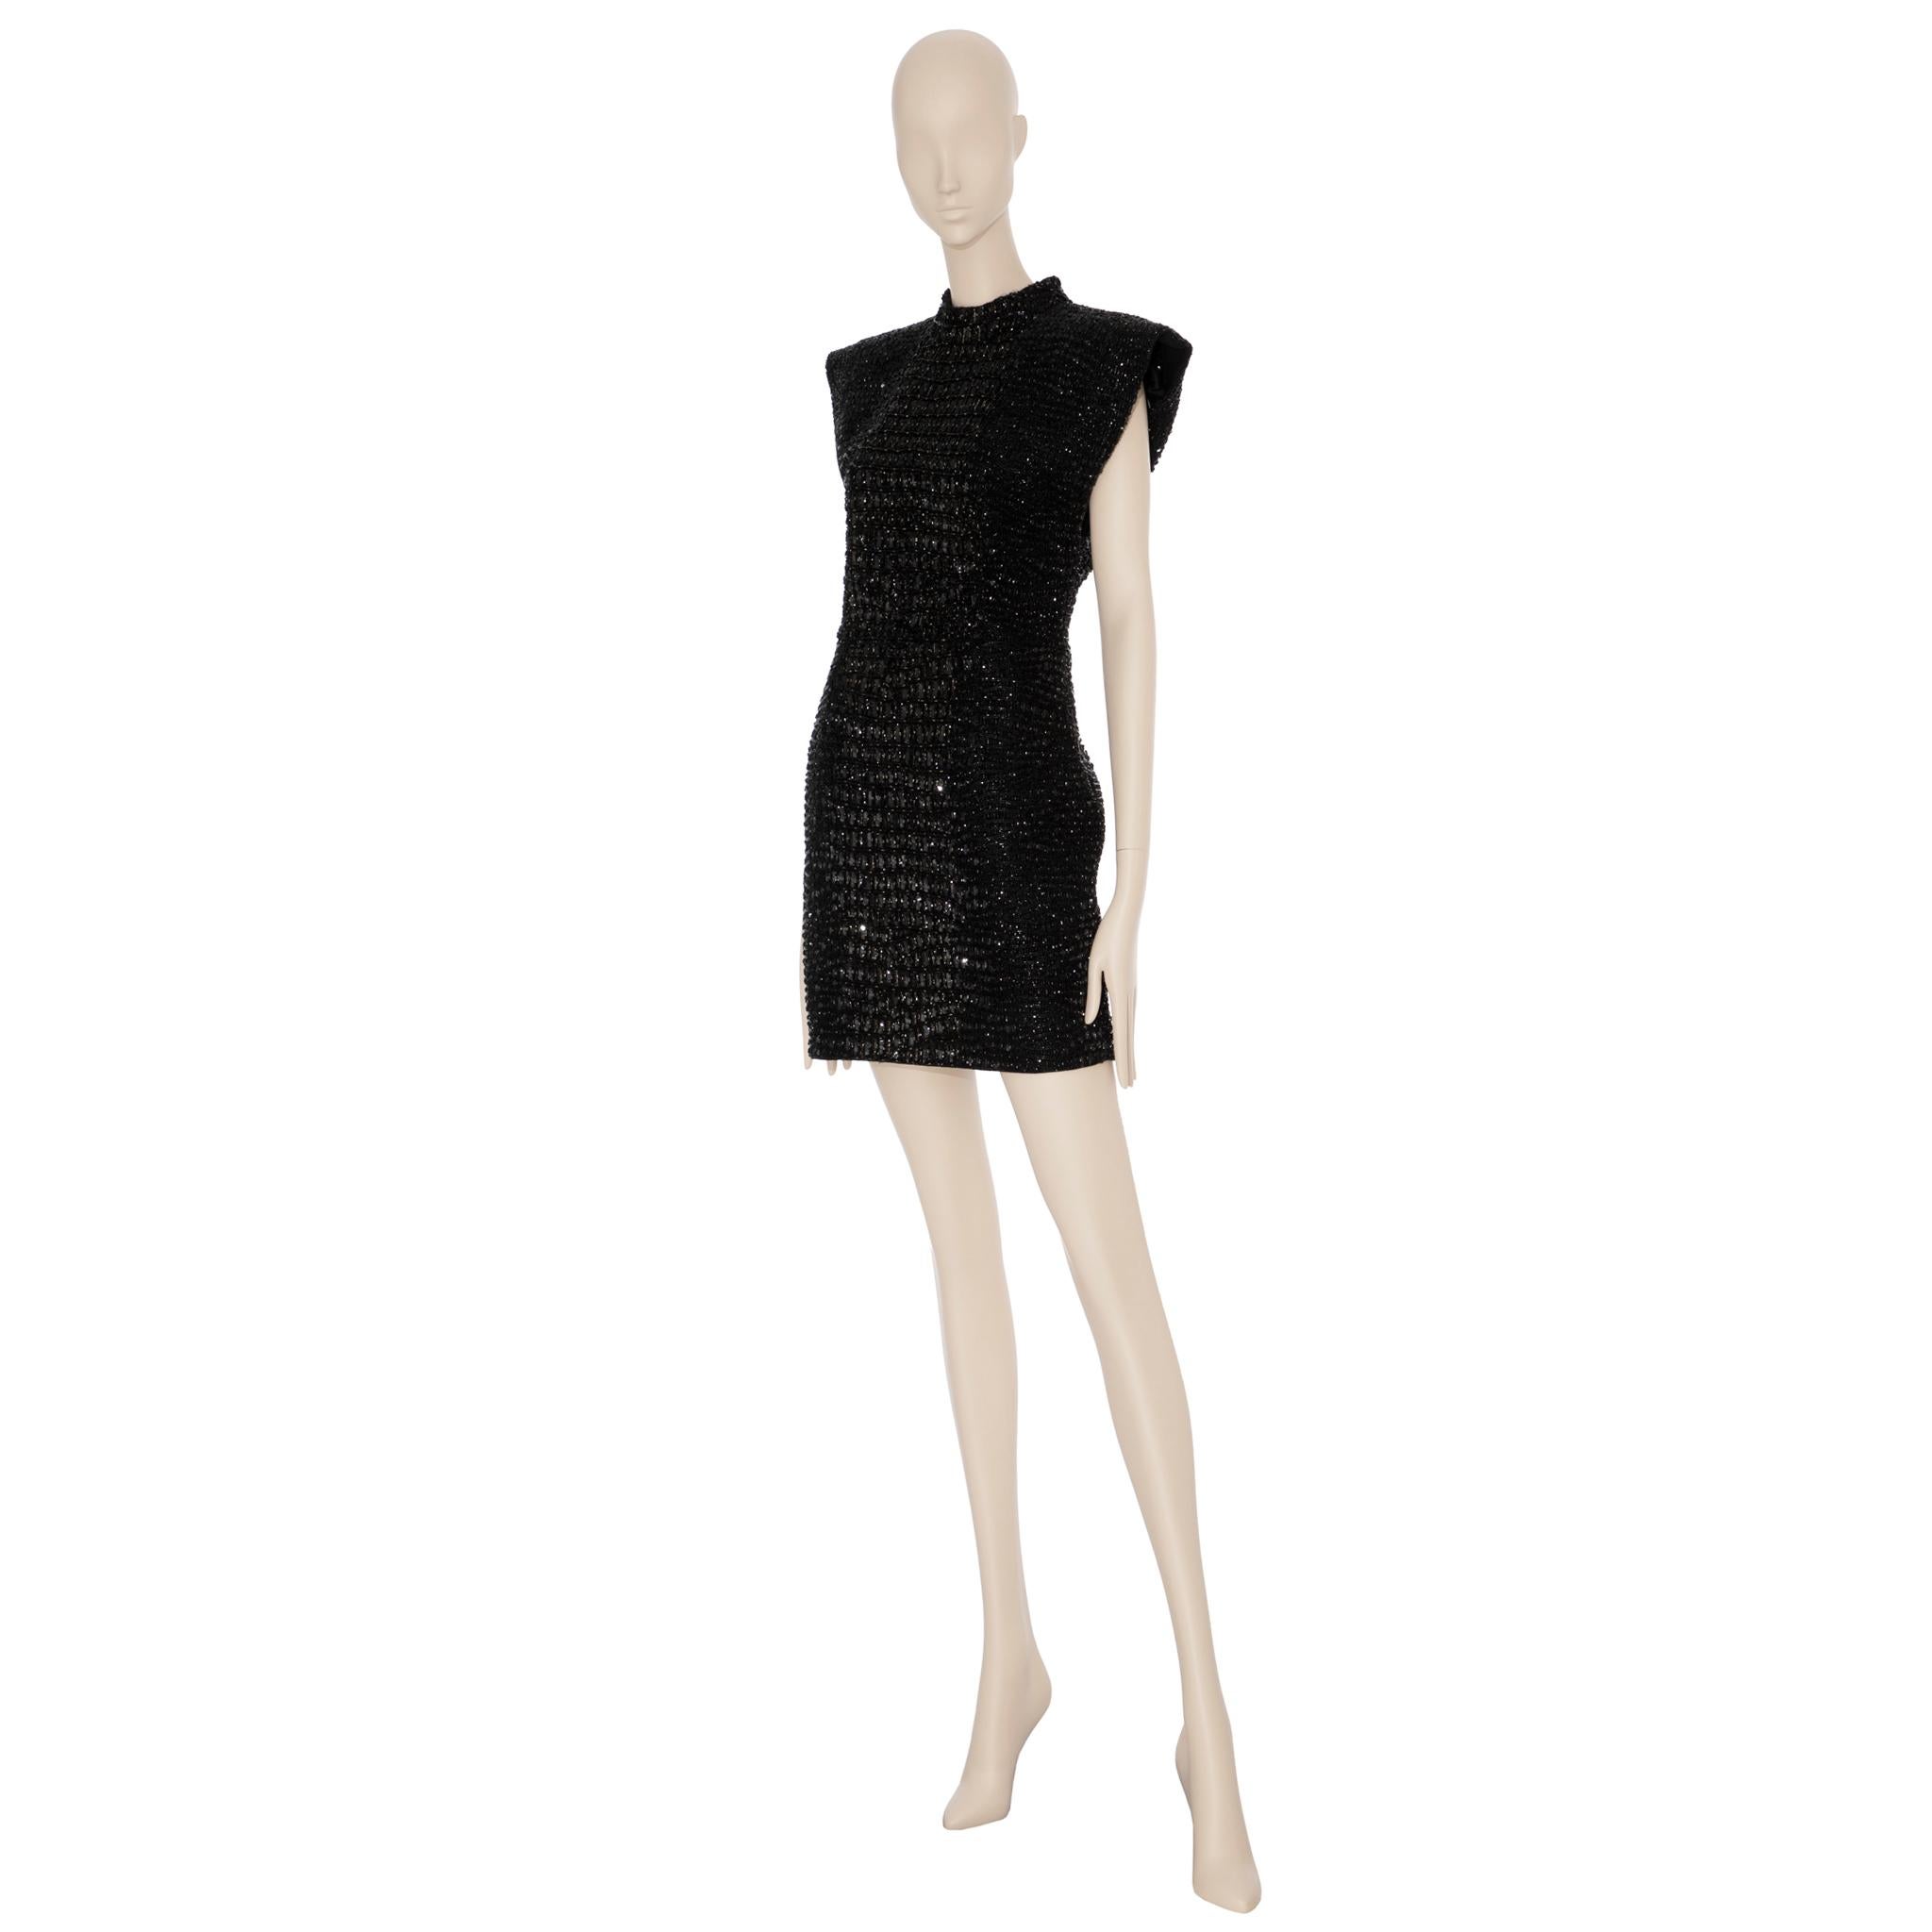 This couture Yves Saint Laurent evening dress is expertly crafted with hand beading in a unique crocodile pattern. Designed to make you stand out, this sophisticated dress is sure to turn heads.


Brand:

Saint Laurent

Product:

Couture Black